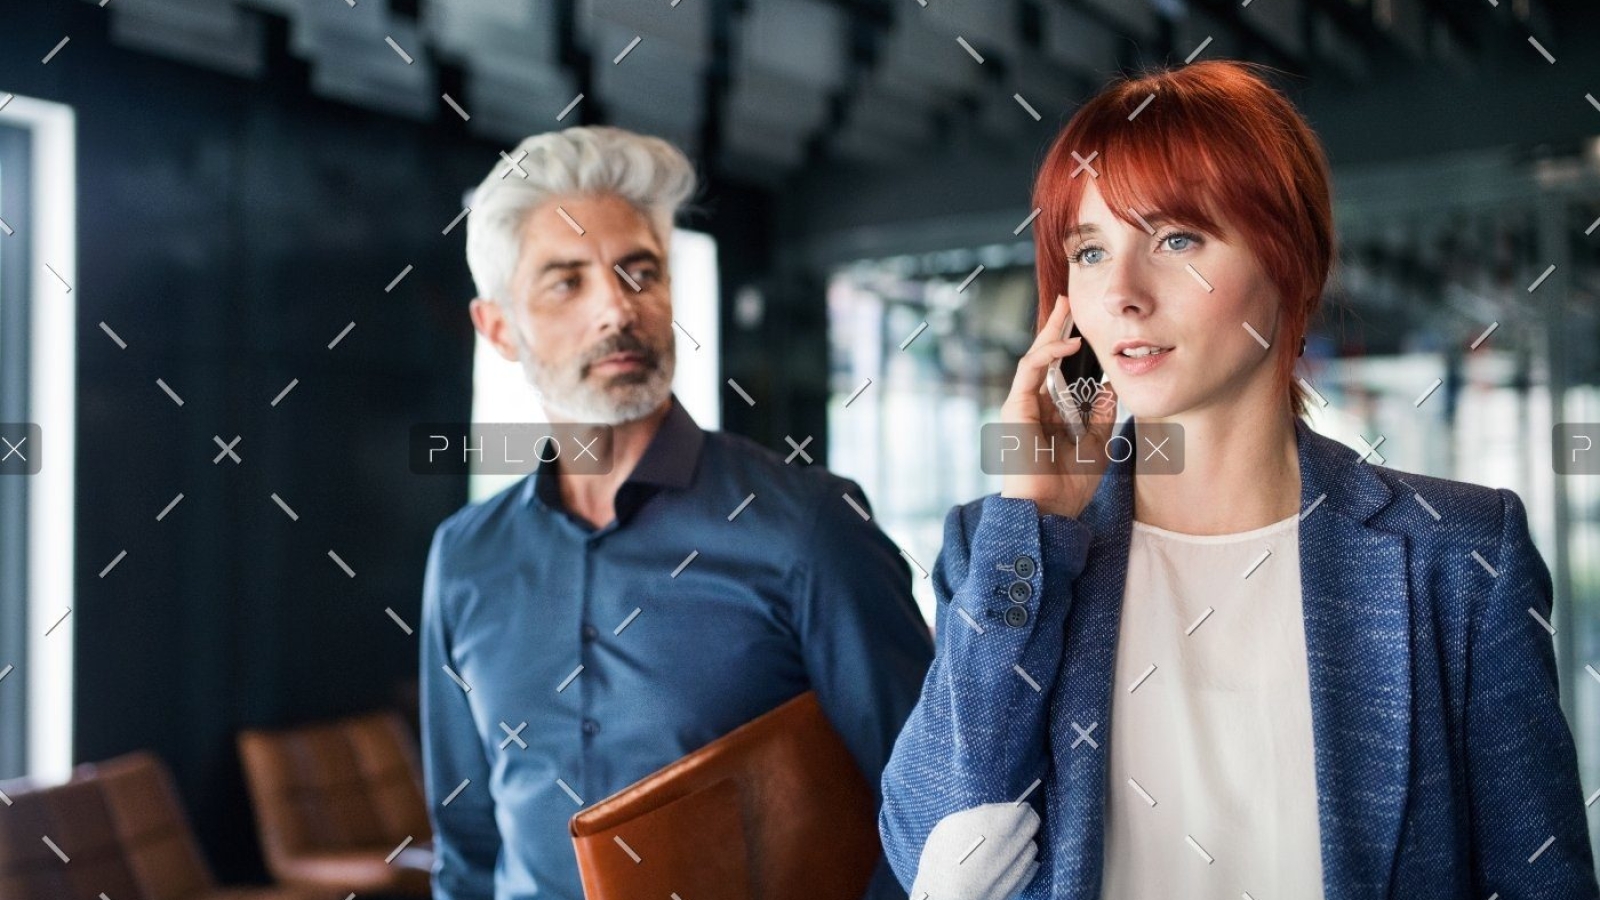 demo-attachment-551-business-people-in-the-office-making-a-phone-call-PQZTHDY